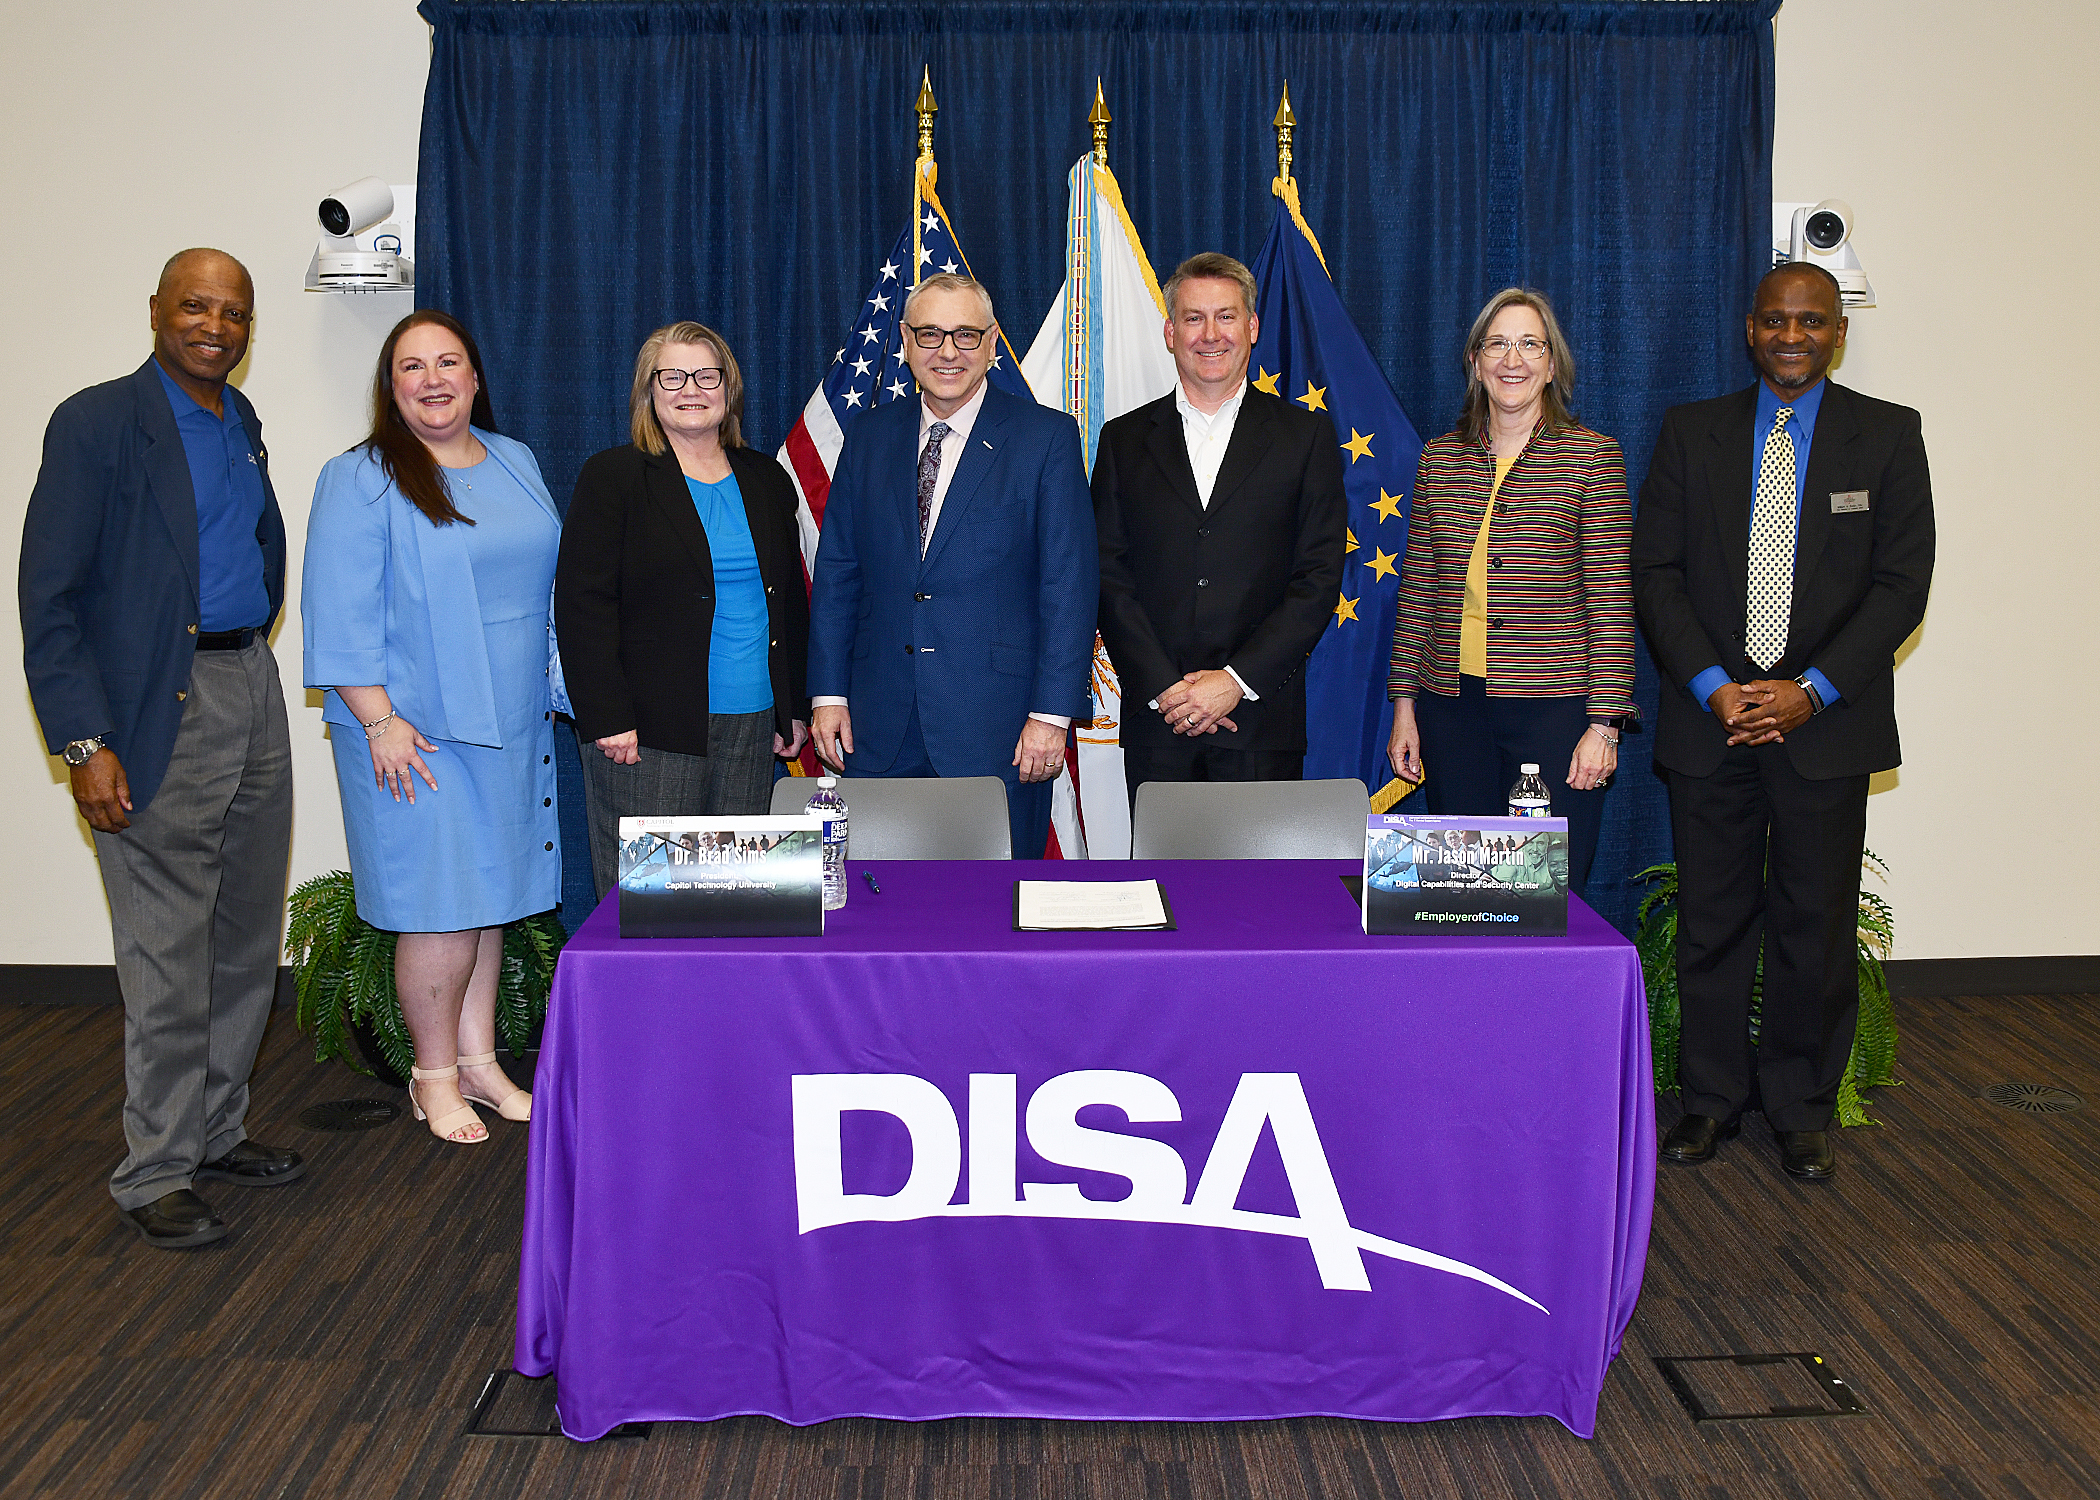 Representatives from DISA and Capitol Technology University pose for a signing ceremony photo June 24 at Fort George G. Meade. (U.S. DOD photo by Thomas L. Burton, DISA/Released). 